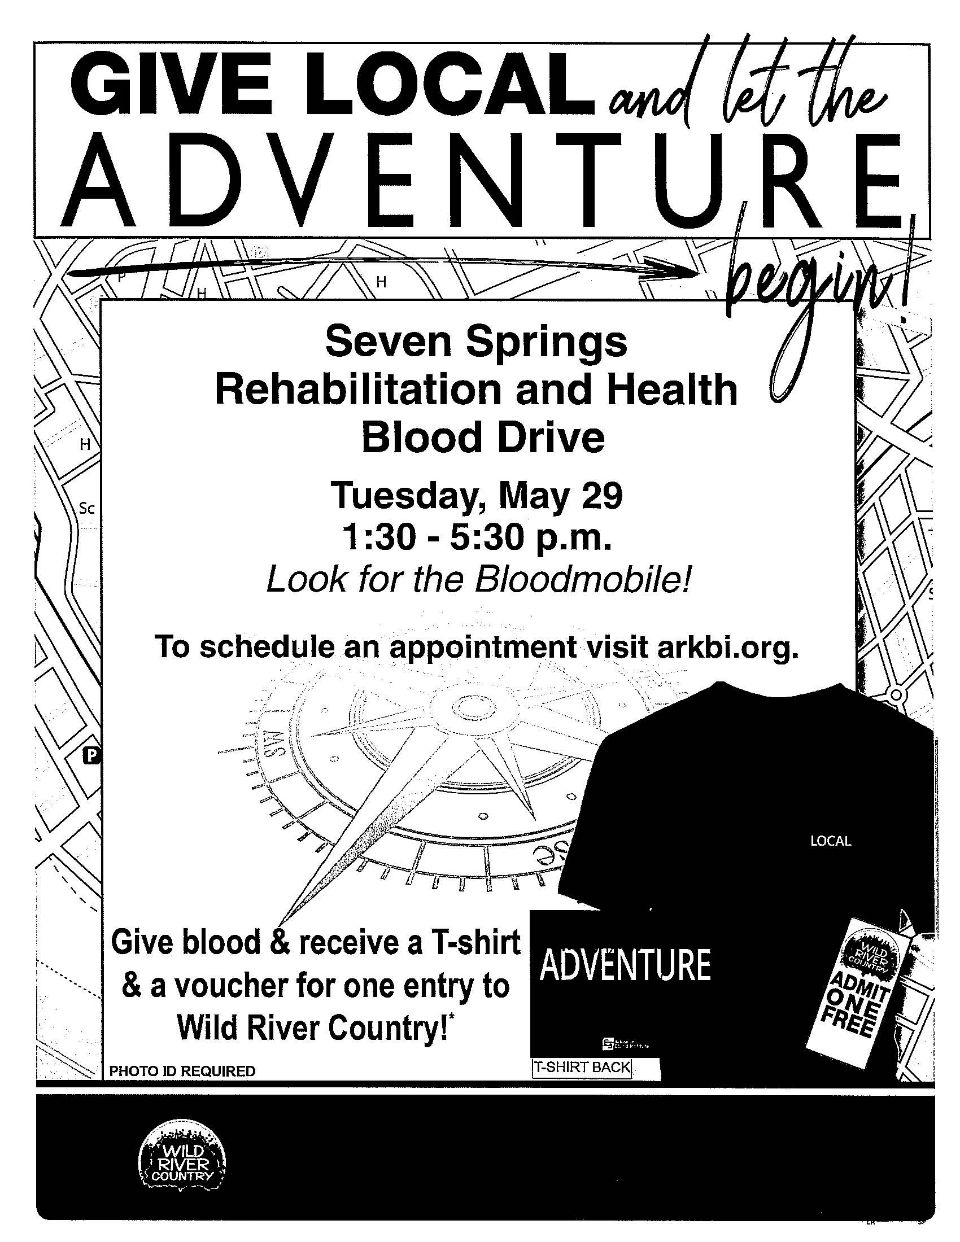 Seven Springs Rehabilitation and Health Blood Drive